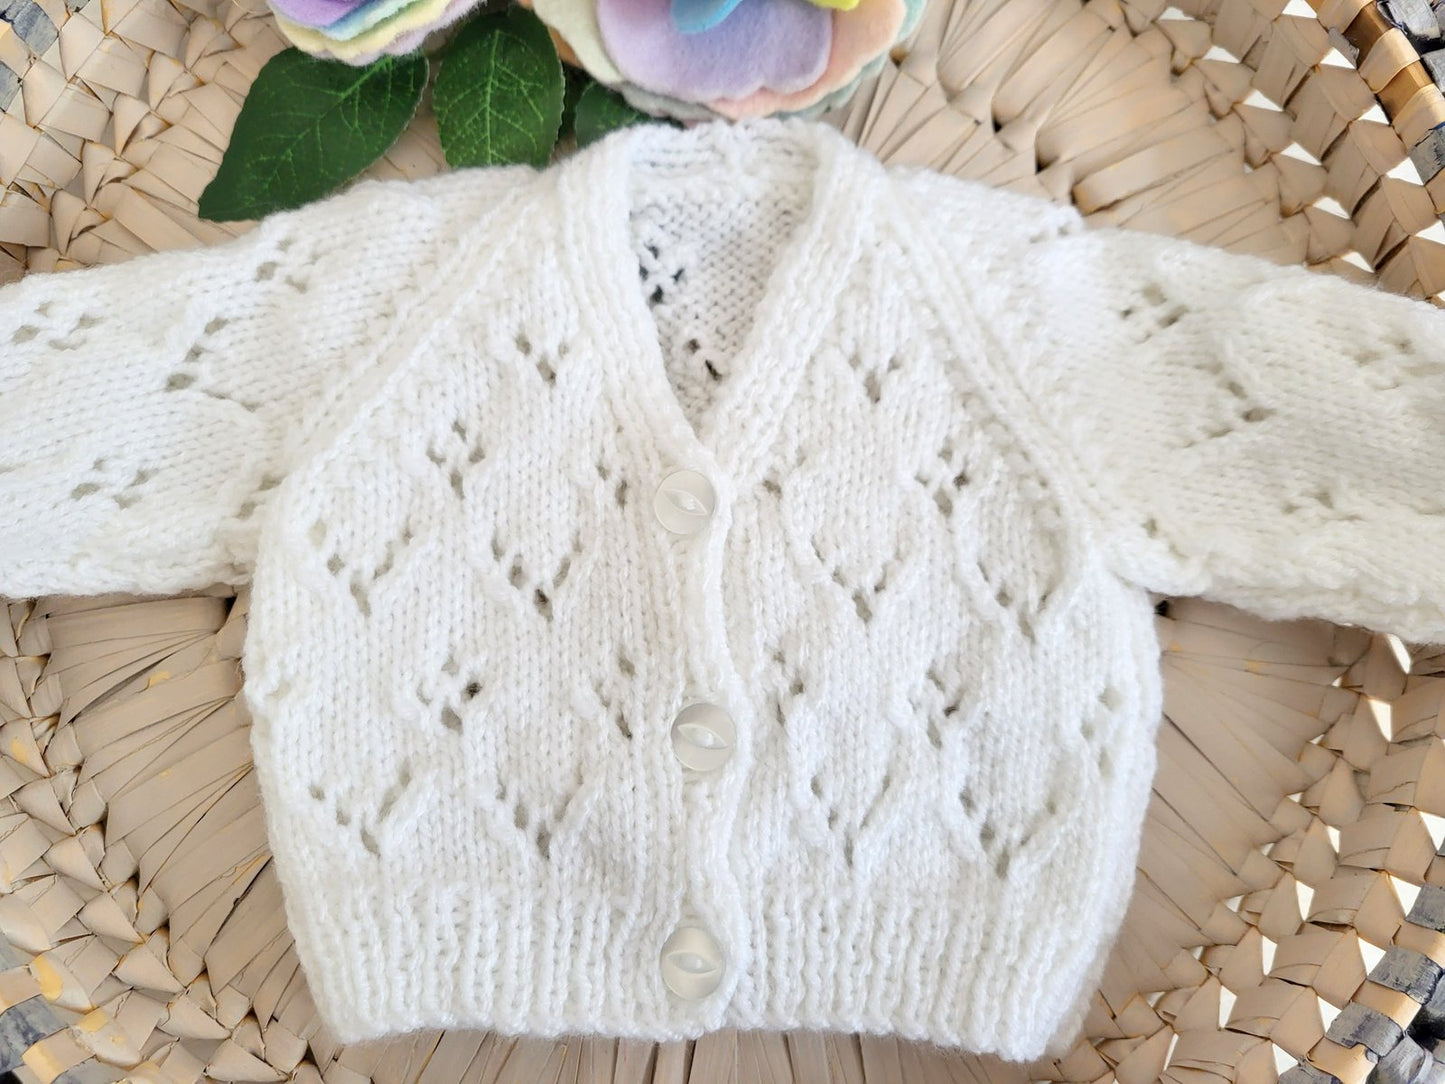 lace pattern knitted baby cardigan'